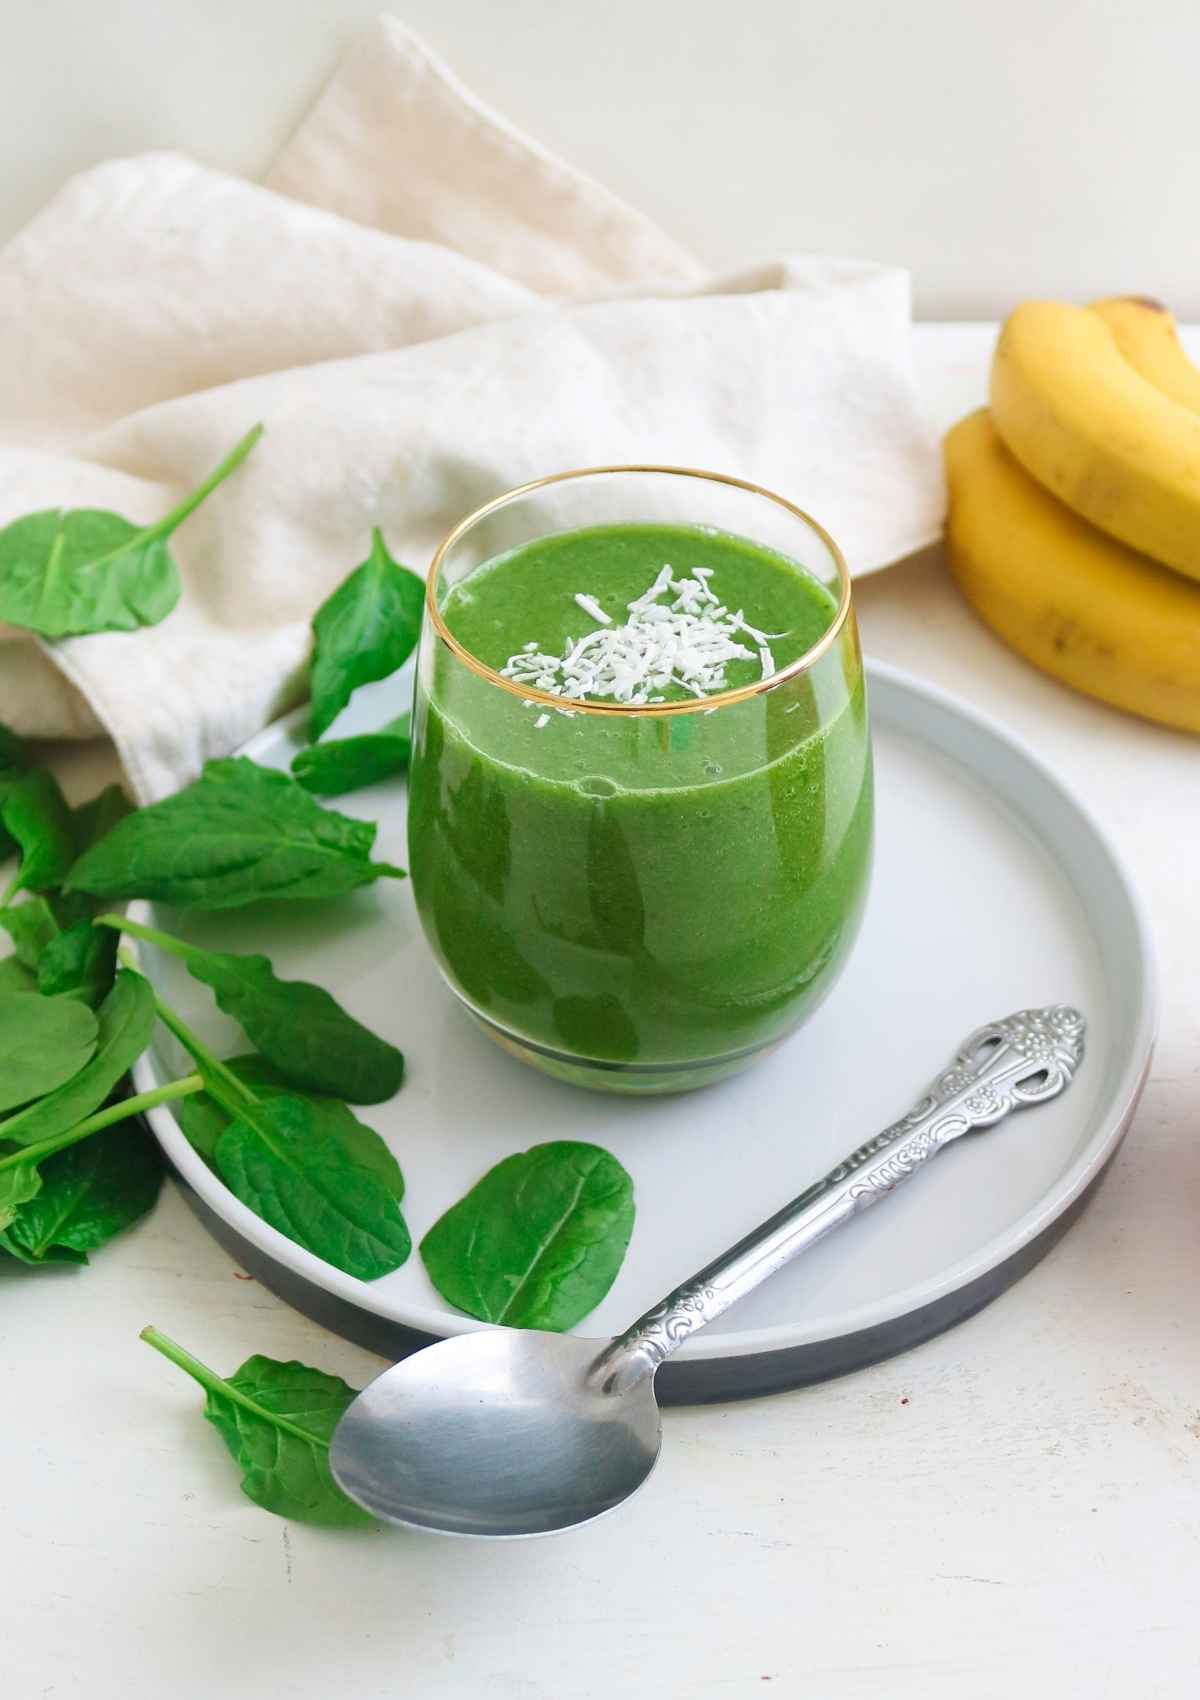 Apple banana spinach smoothie in a glass with a silver spoon.